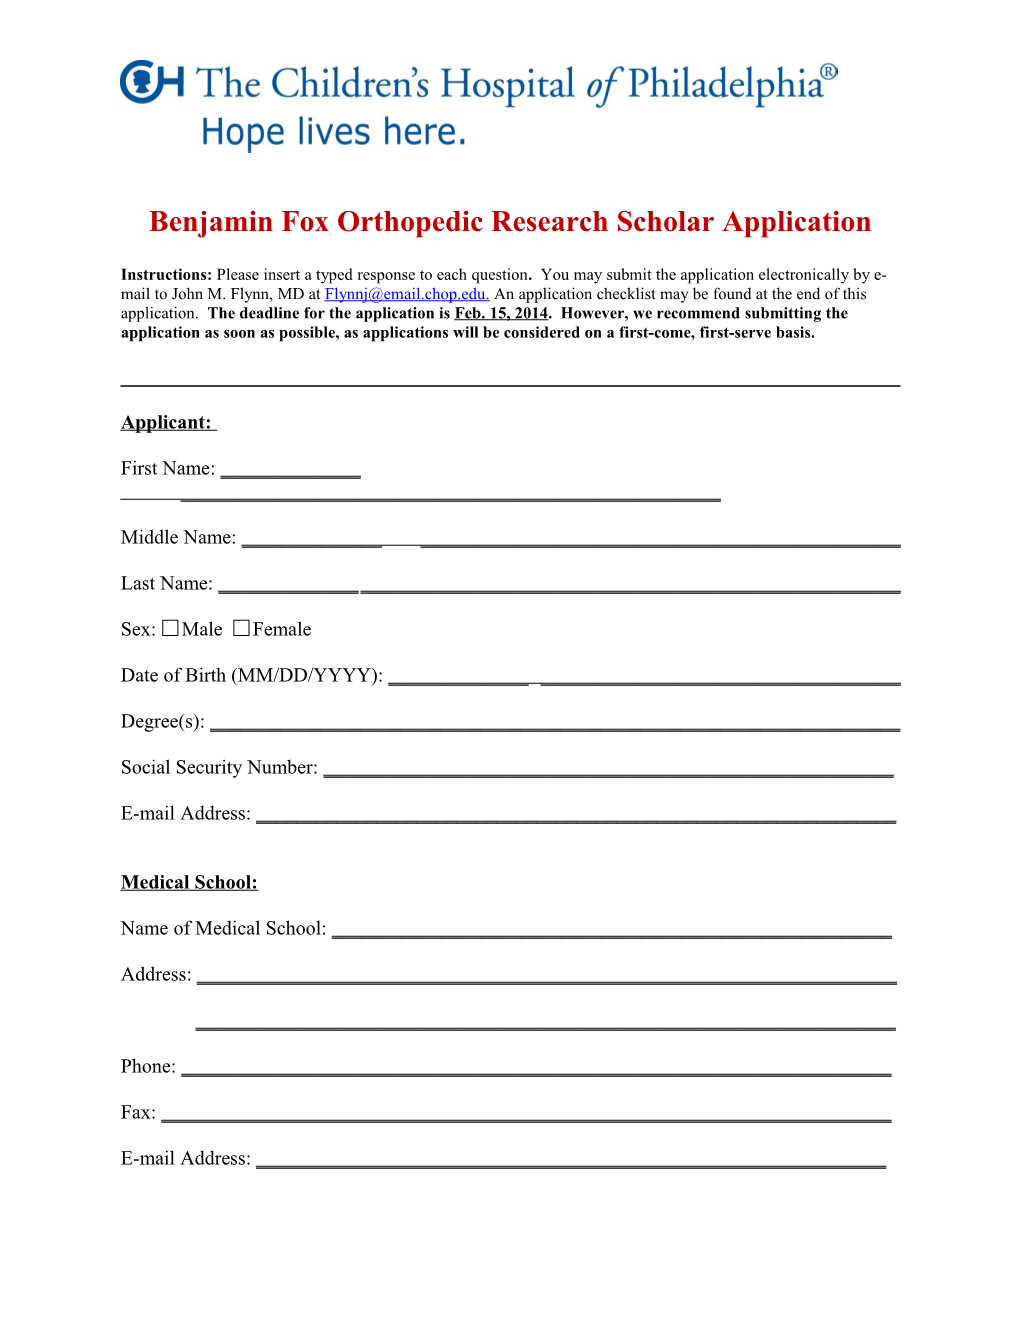 The CHOP Orthopaedics Medical School Scholar Award Promotes Clinical Research by Giving